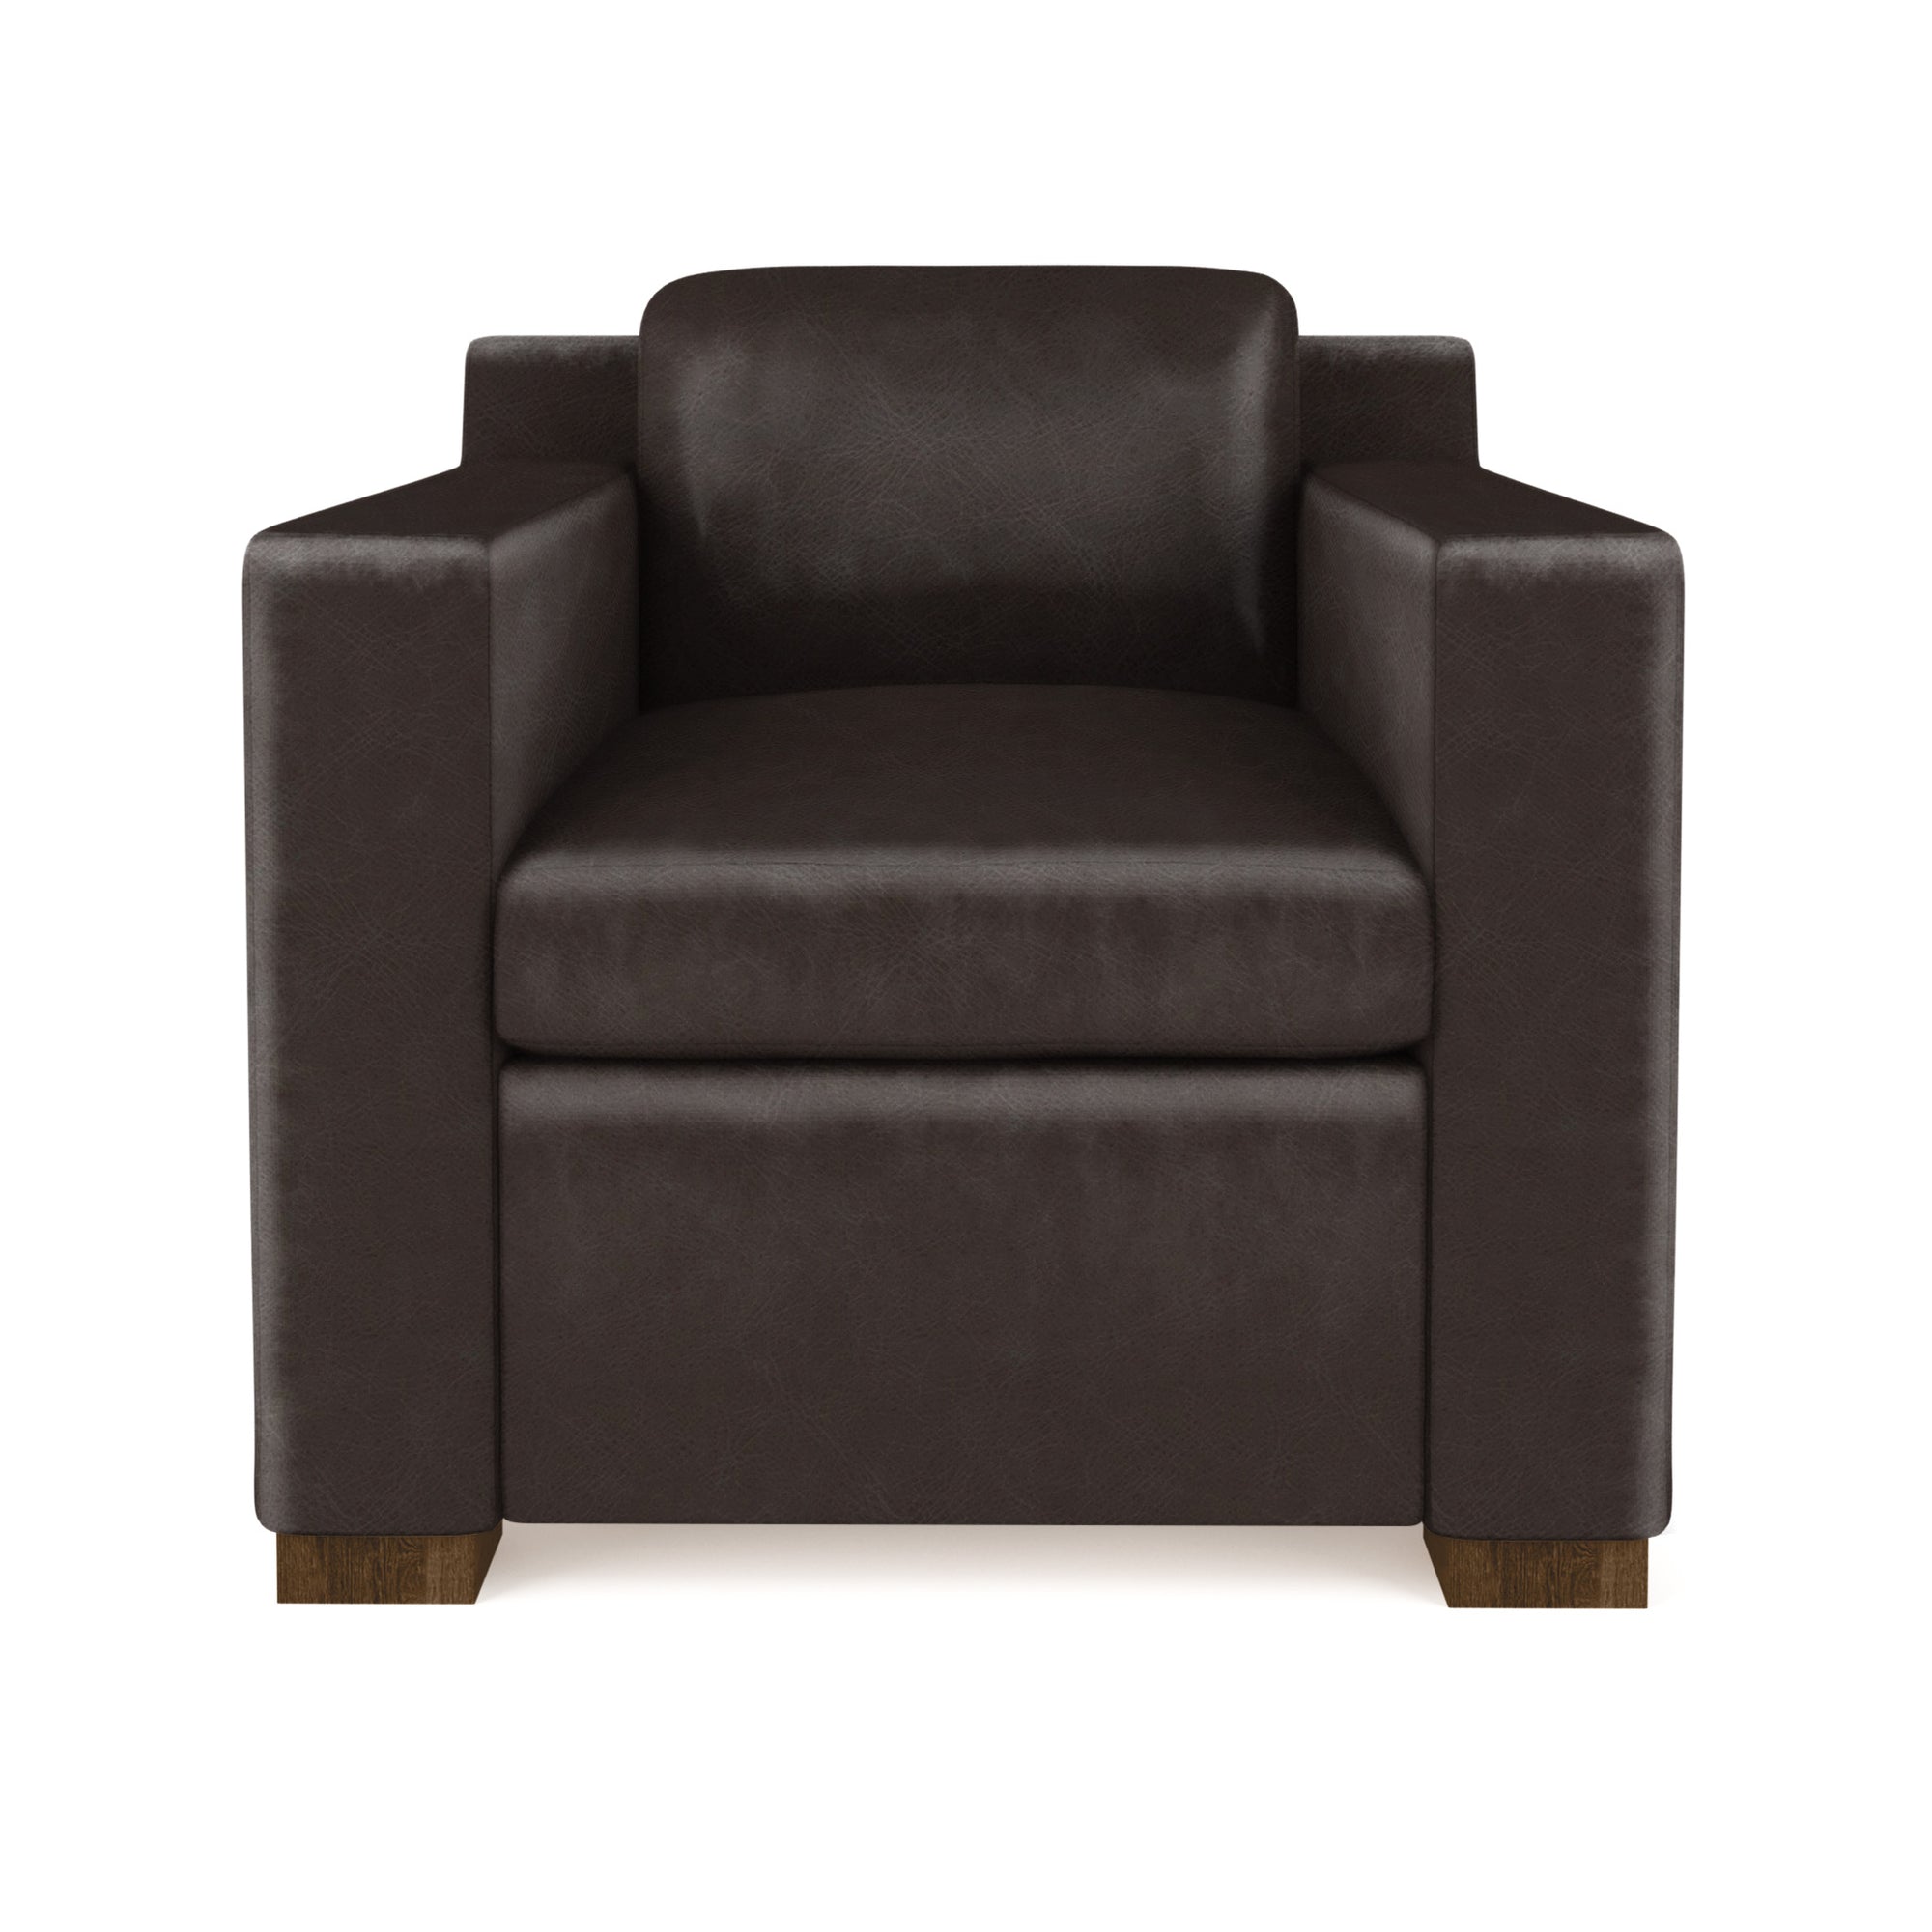 Mercer Chair - Chocolate Vintage Leather